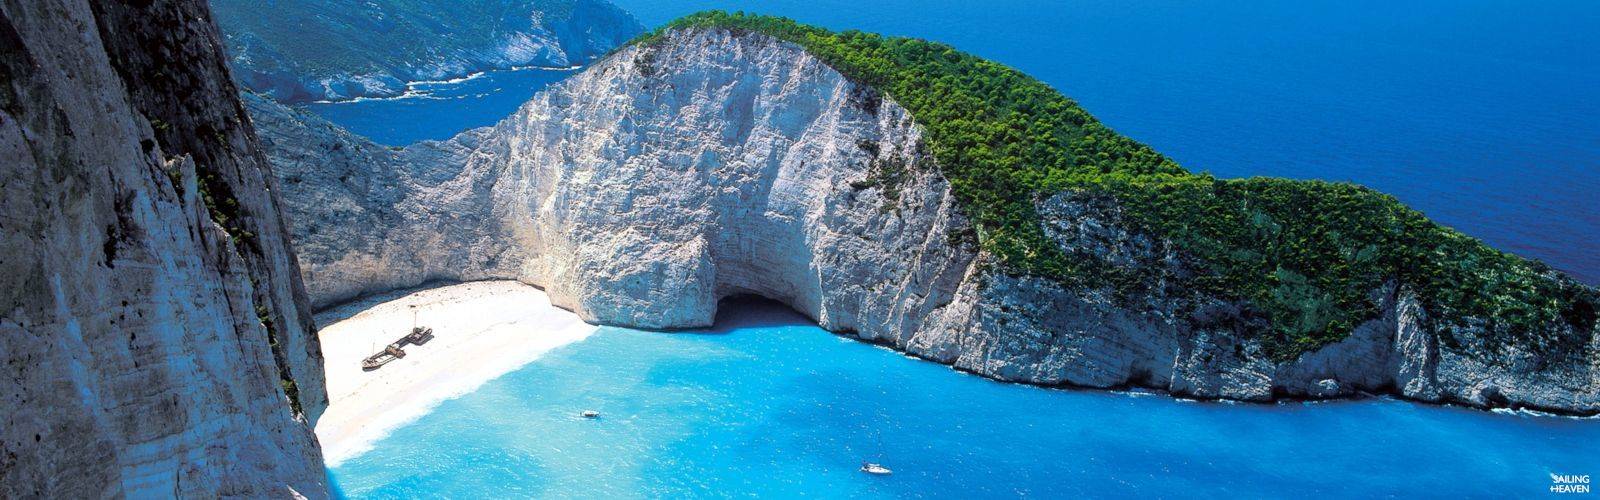 Reaching notorious island destinations aboard a skippered yacht charter in Greece.